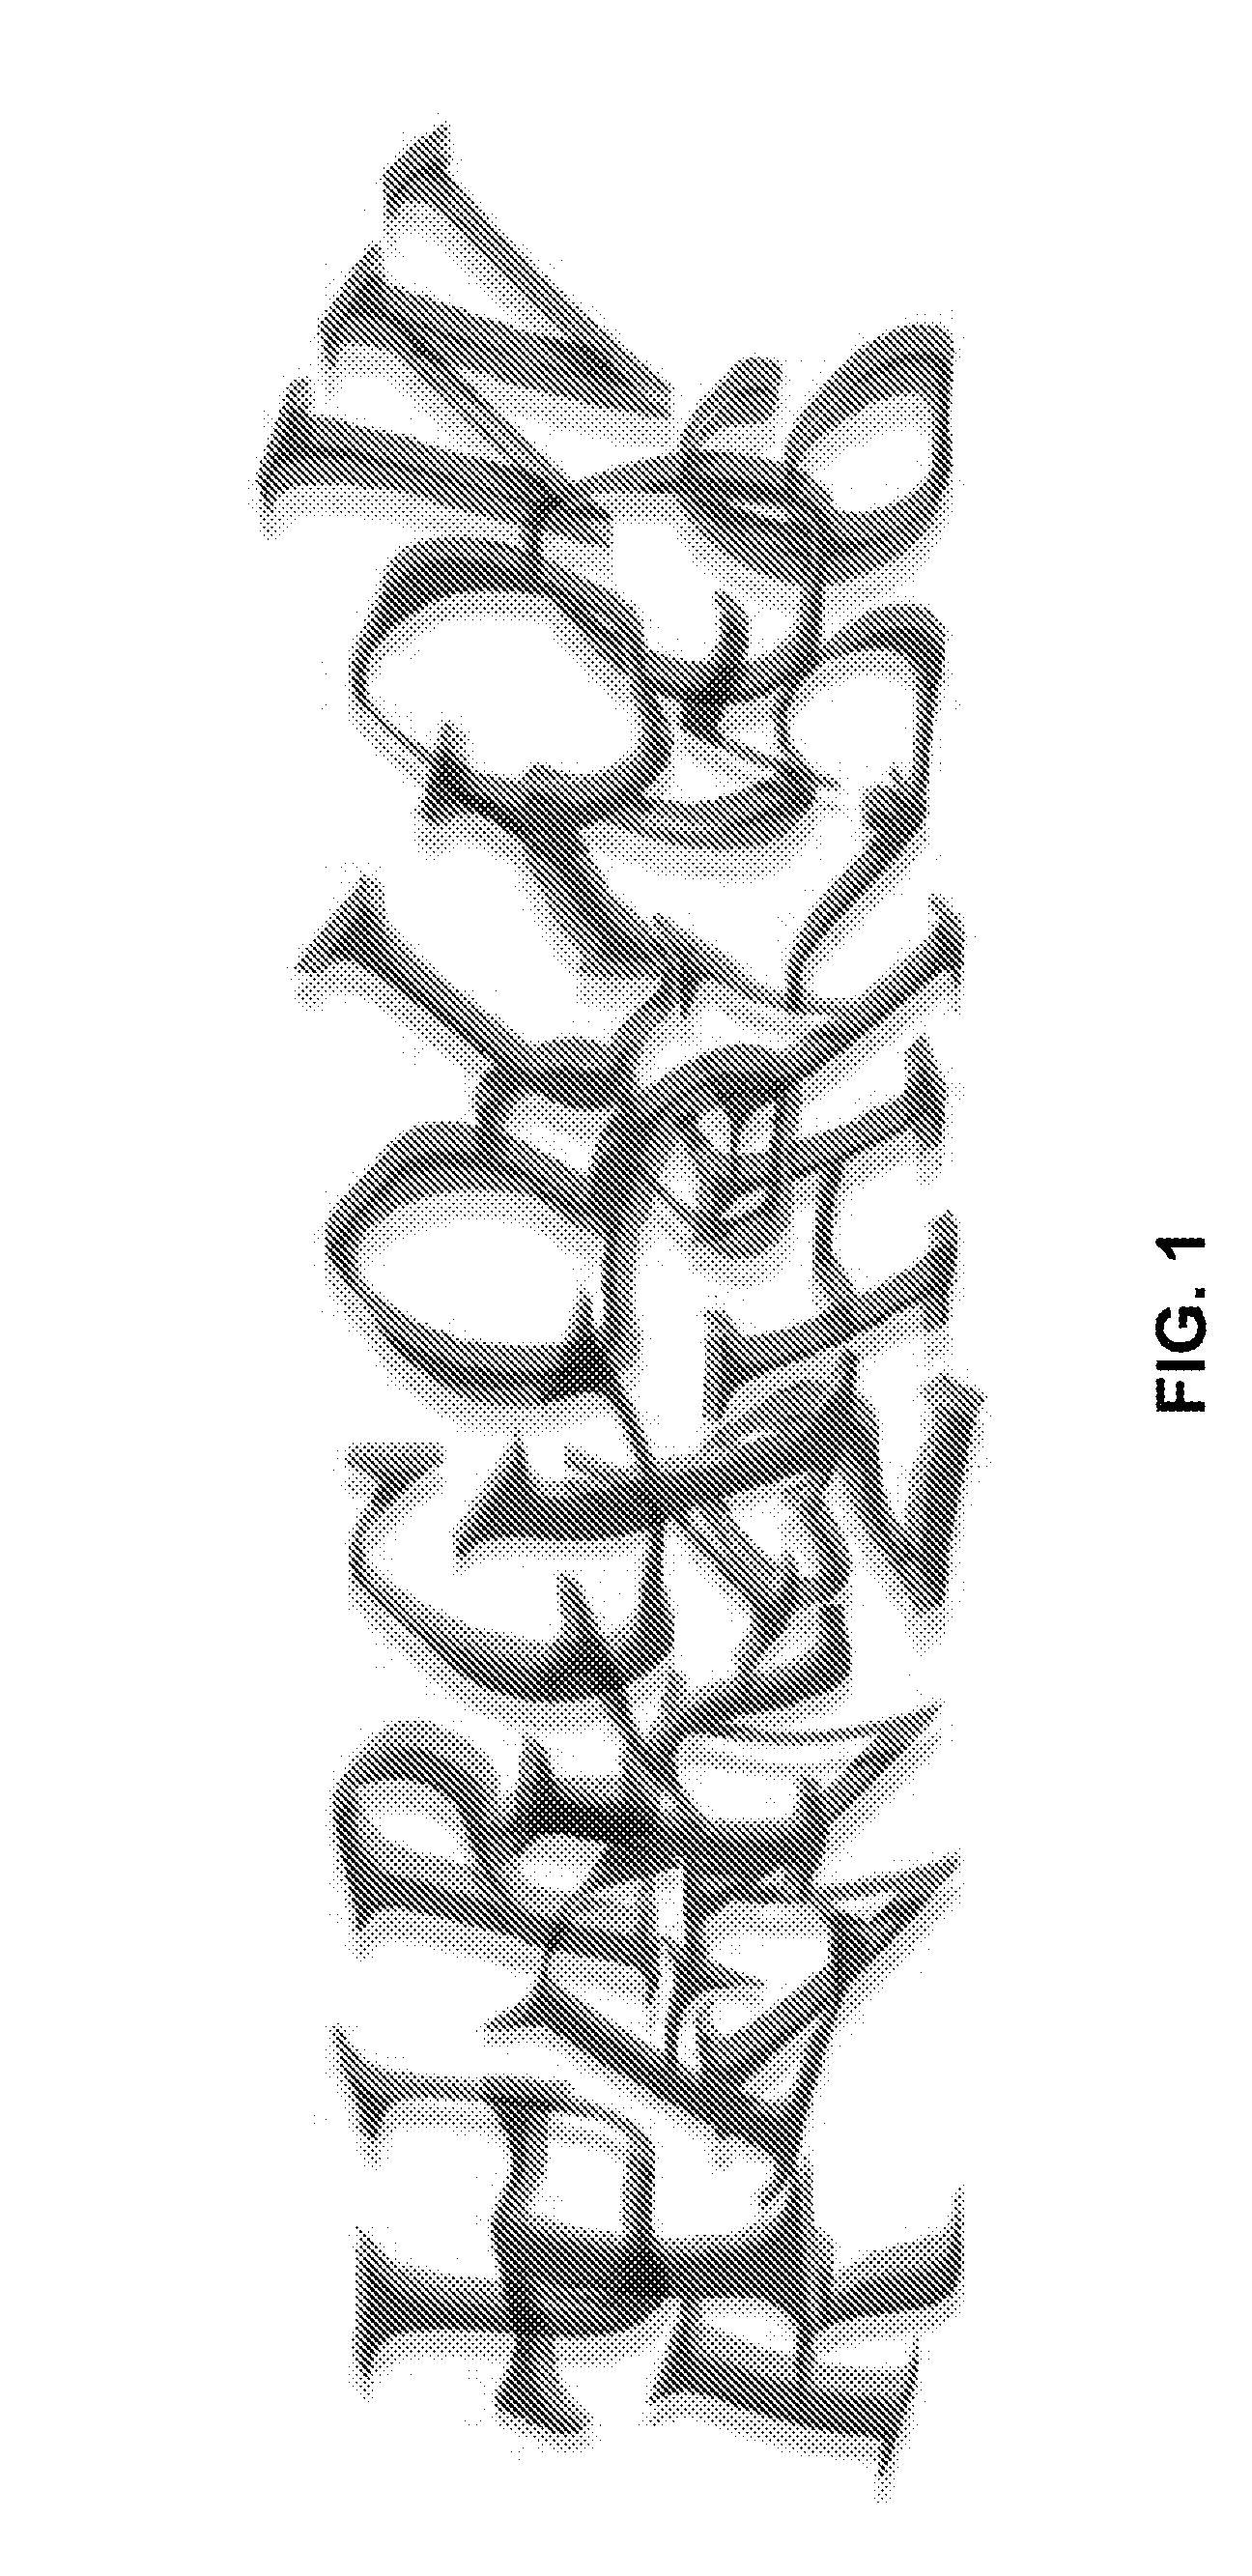 Multi Dimensional CAPTCHA System and Method